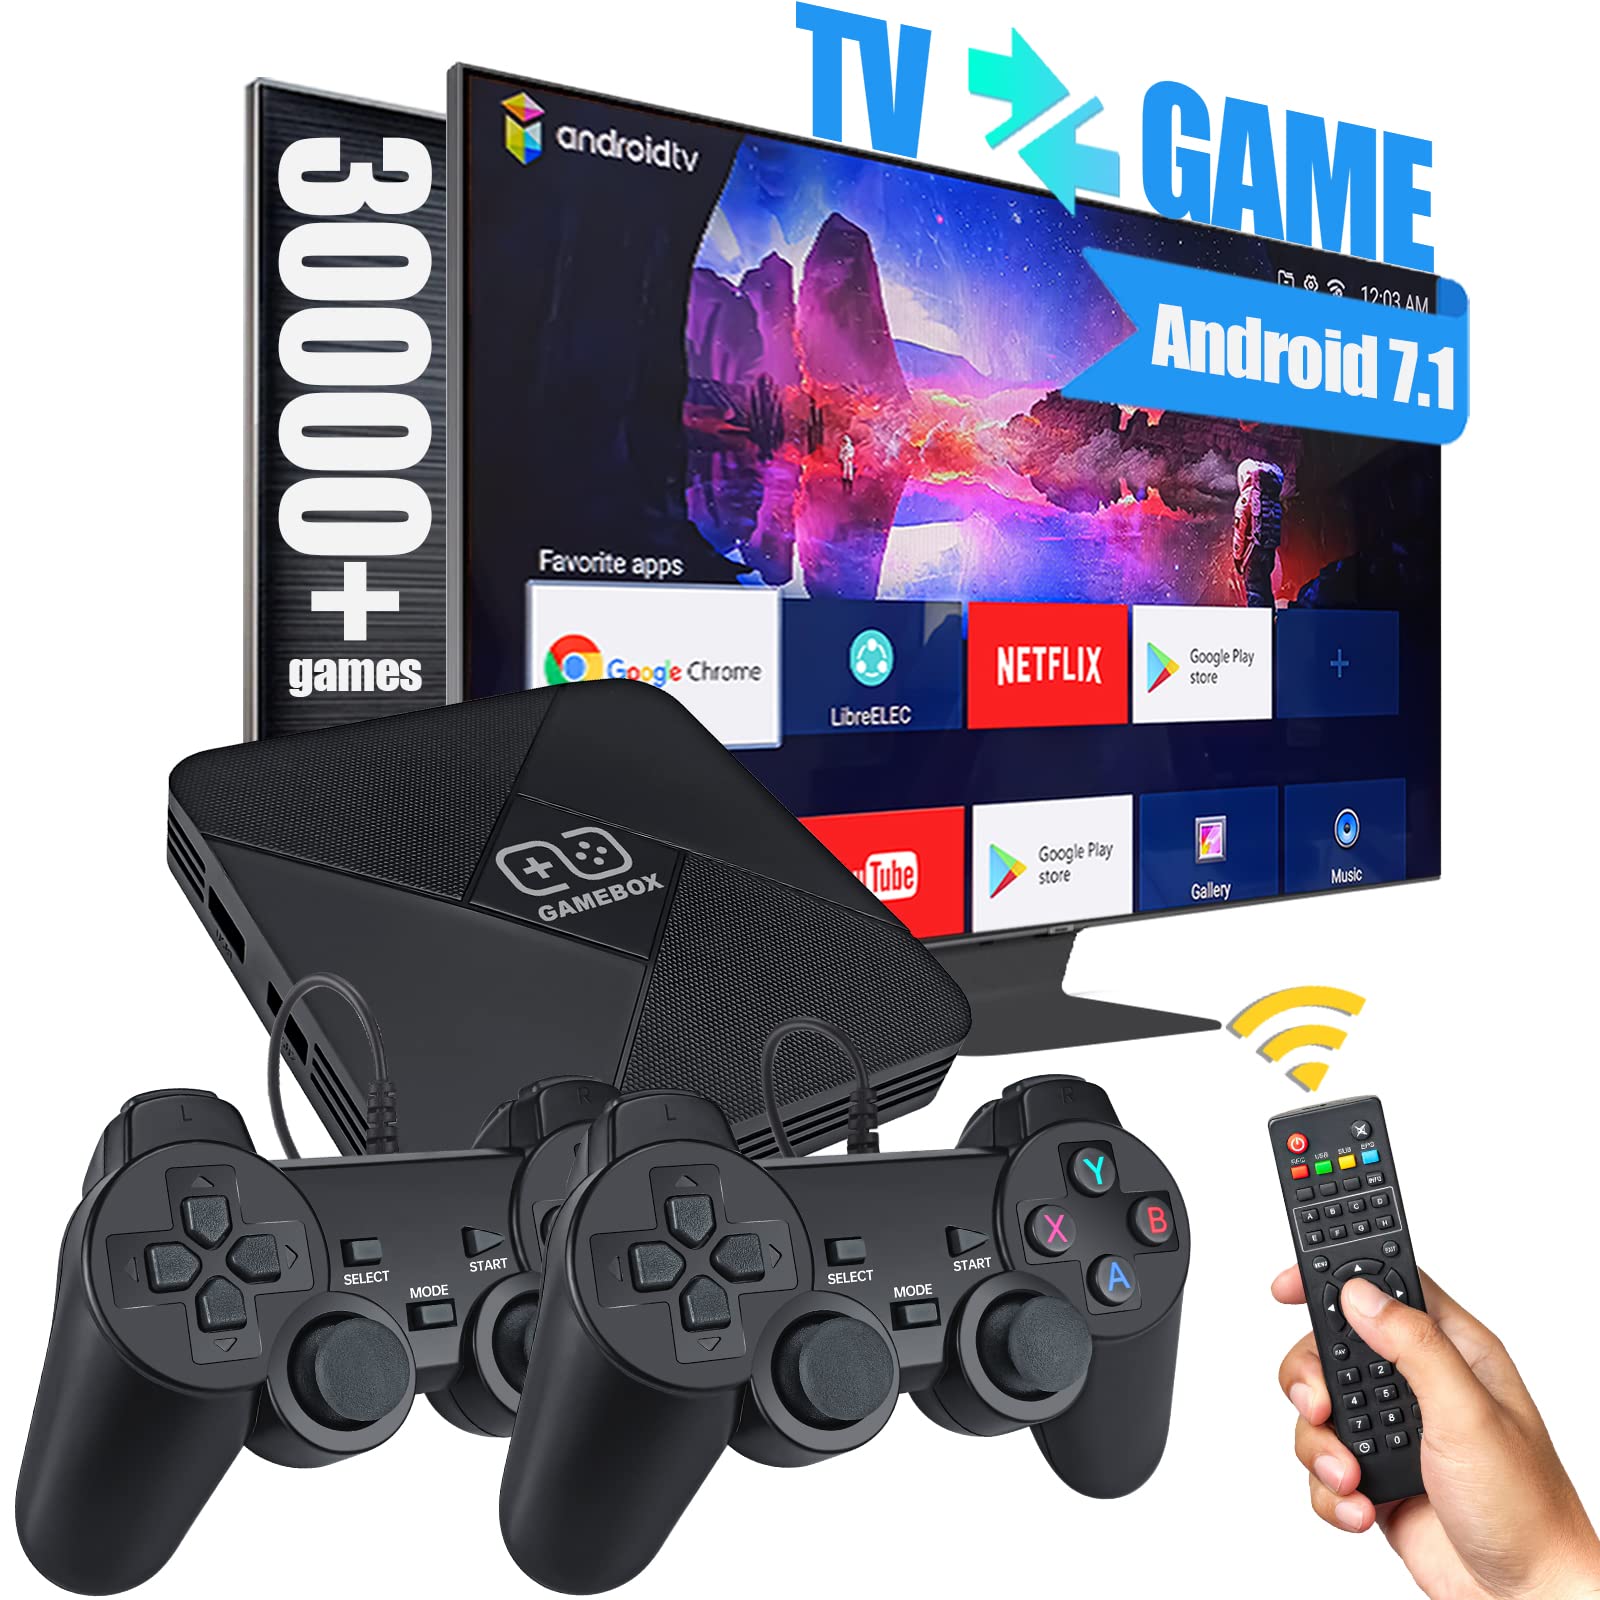 Fadist Super Console 64G, Retro Game Console/Android TV 2 in 1, Built in 30000+ Classic 2D/3D Video Games, 4K HD Output, Plug and Play, Suitable for Home, Party, Gift